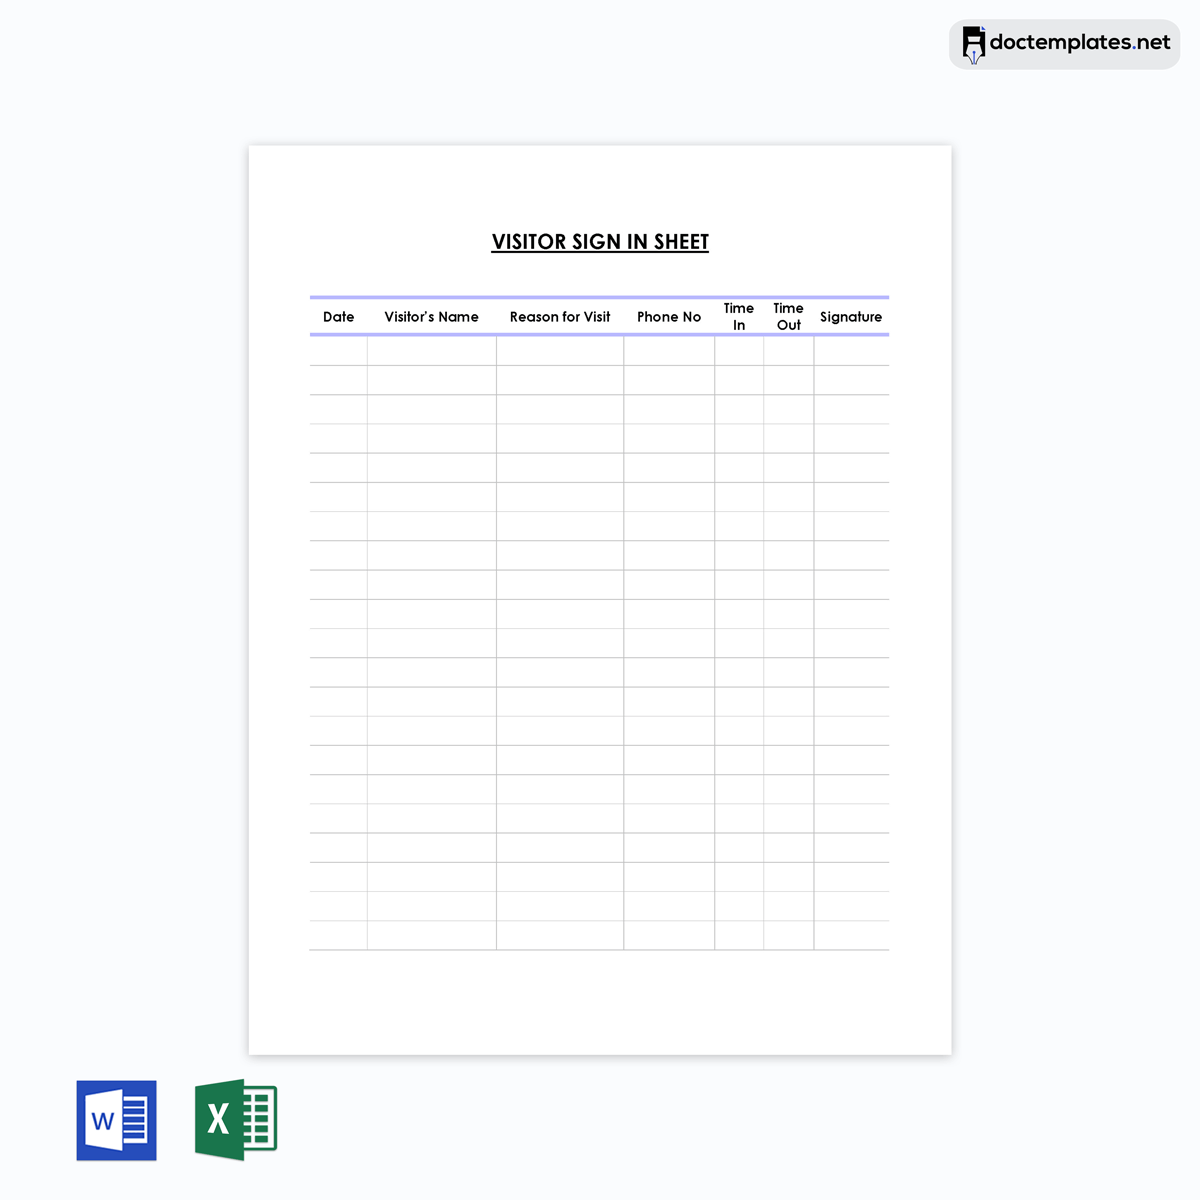 Sign-in sheet template Word